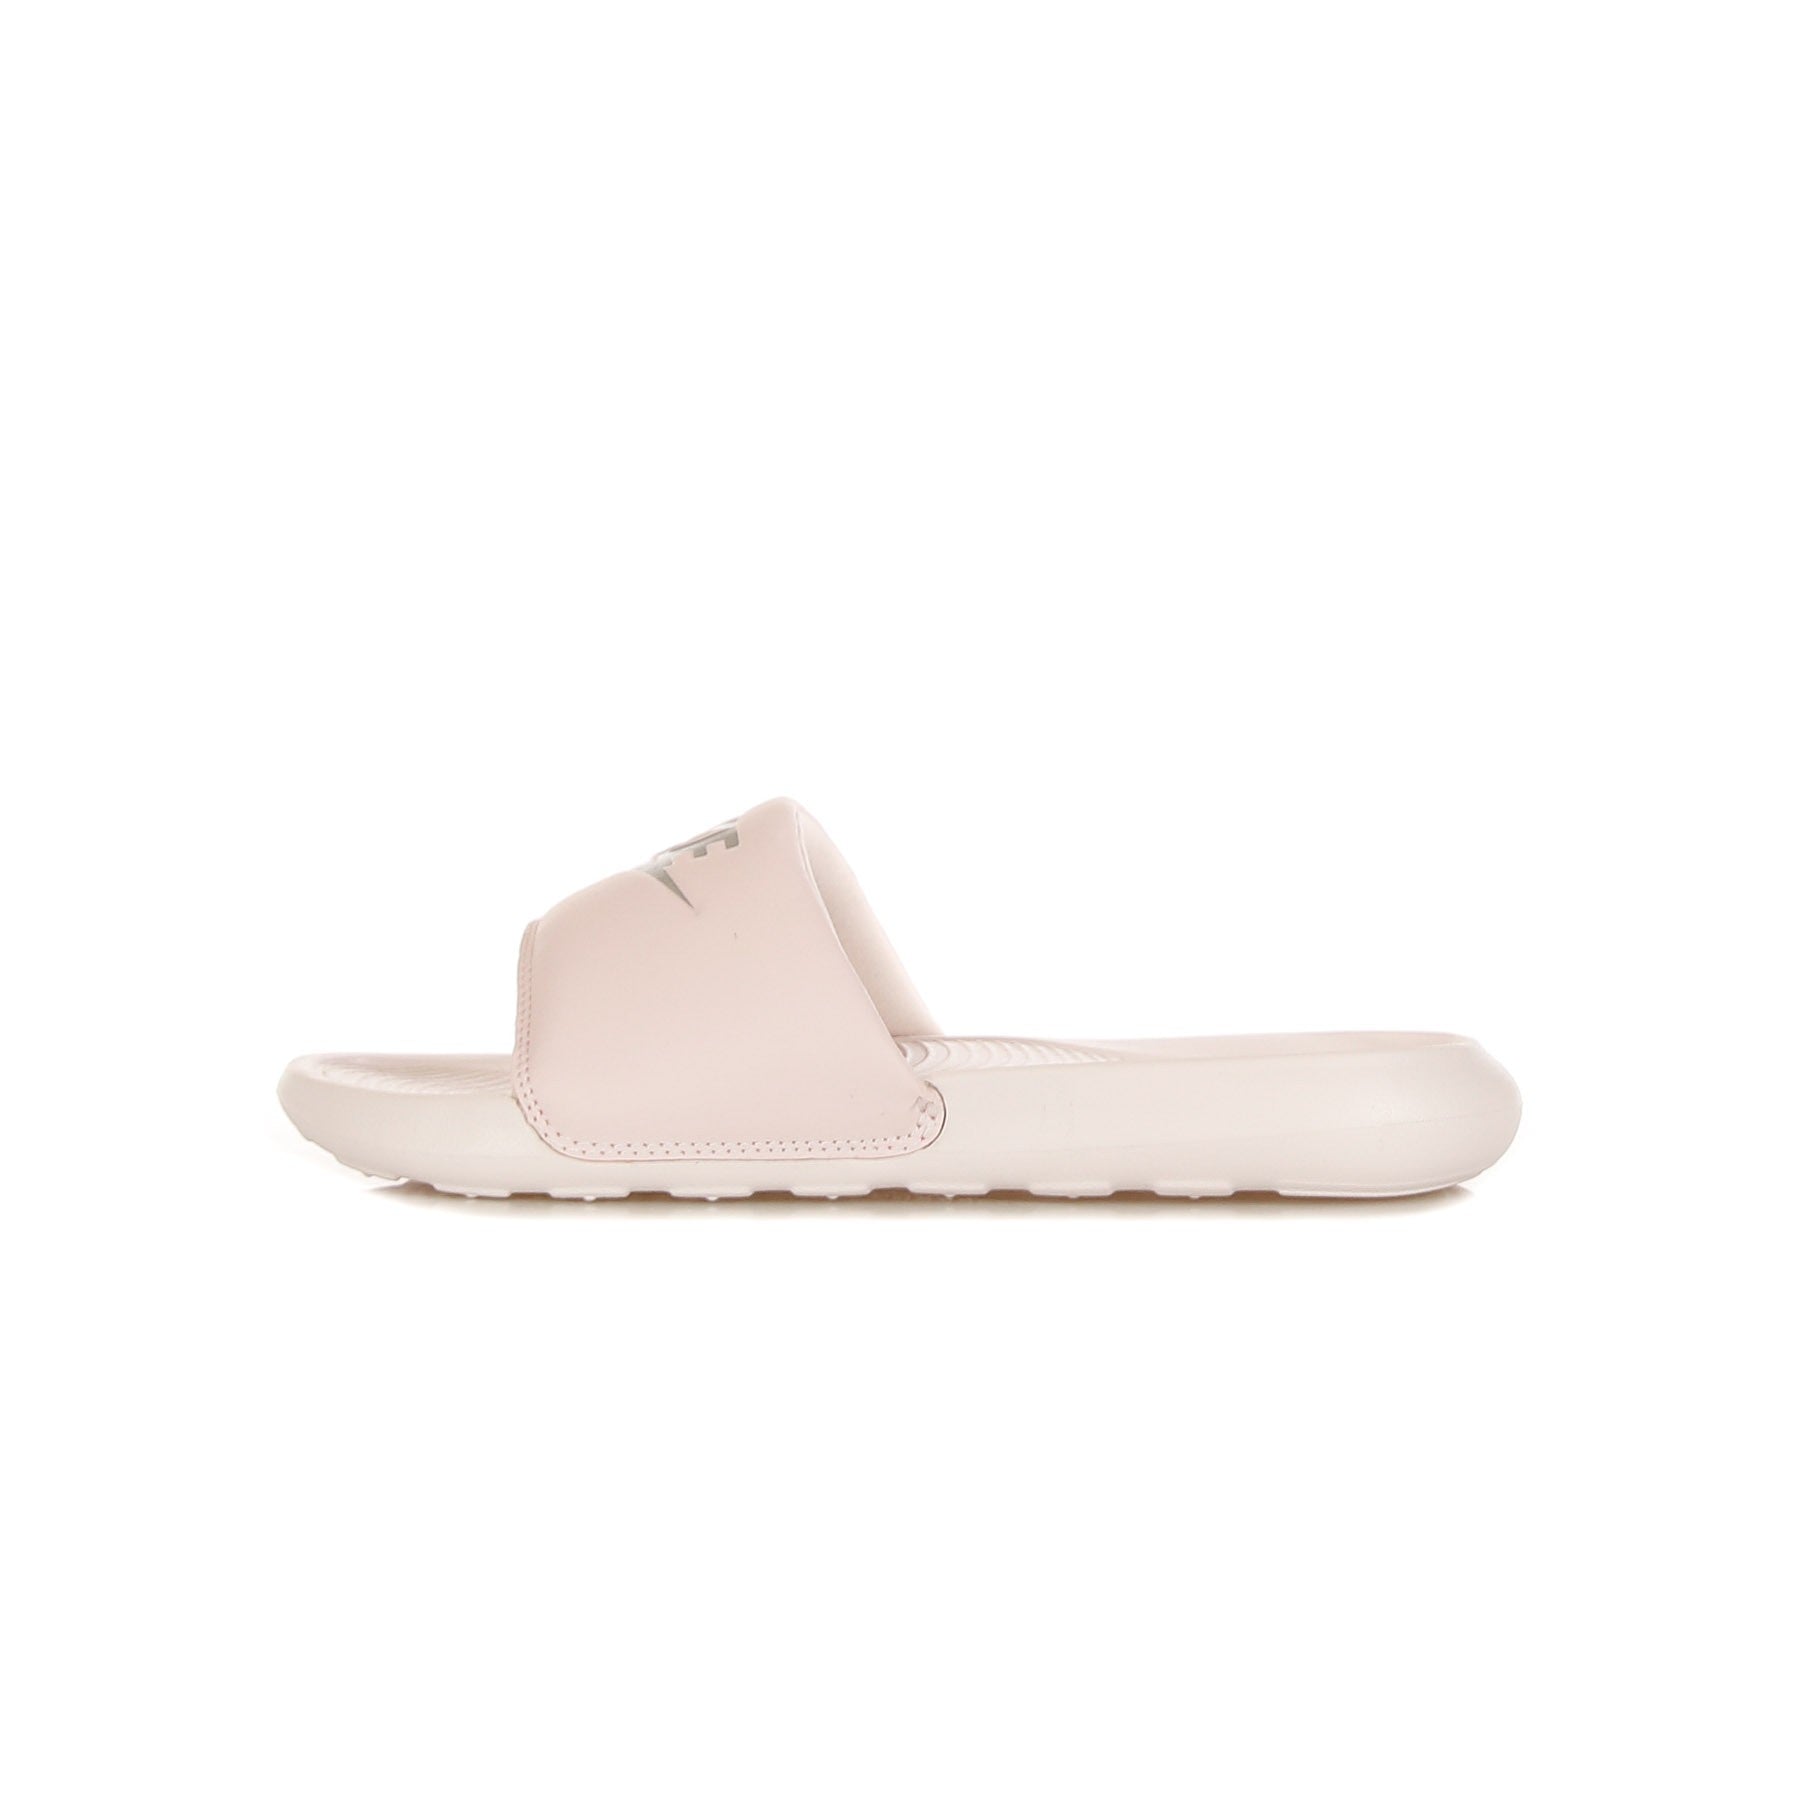 Nike, Ciabatte Donna W Victori One Slide, Barely Rose/metallic Silver/barely Rose